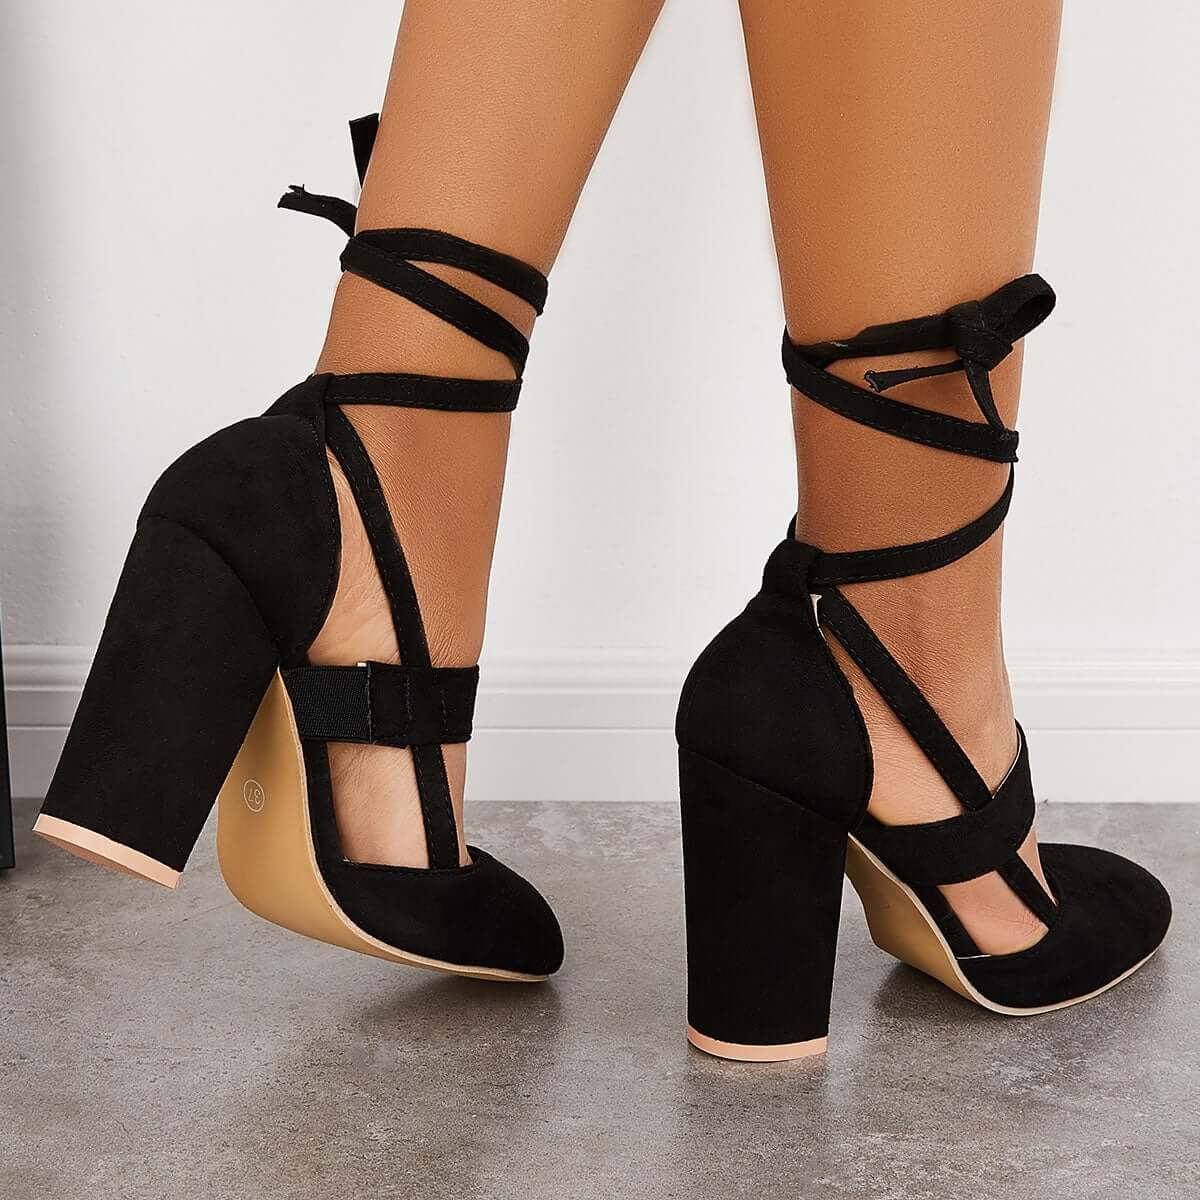 Chunky Block High Heels Lace Up Dress Sandals Ankle Strappy Pumps Pairmore